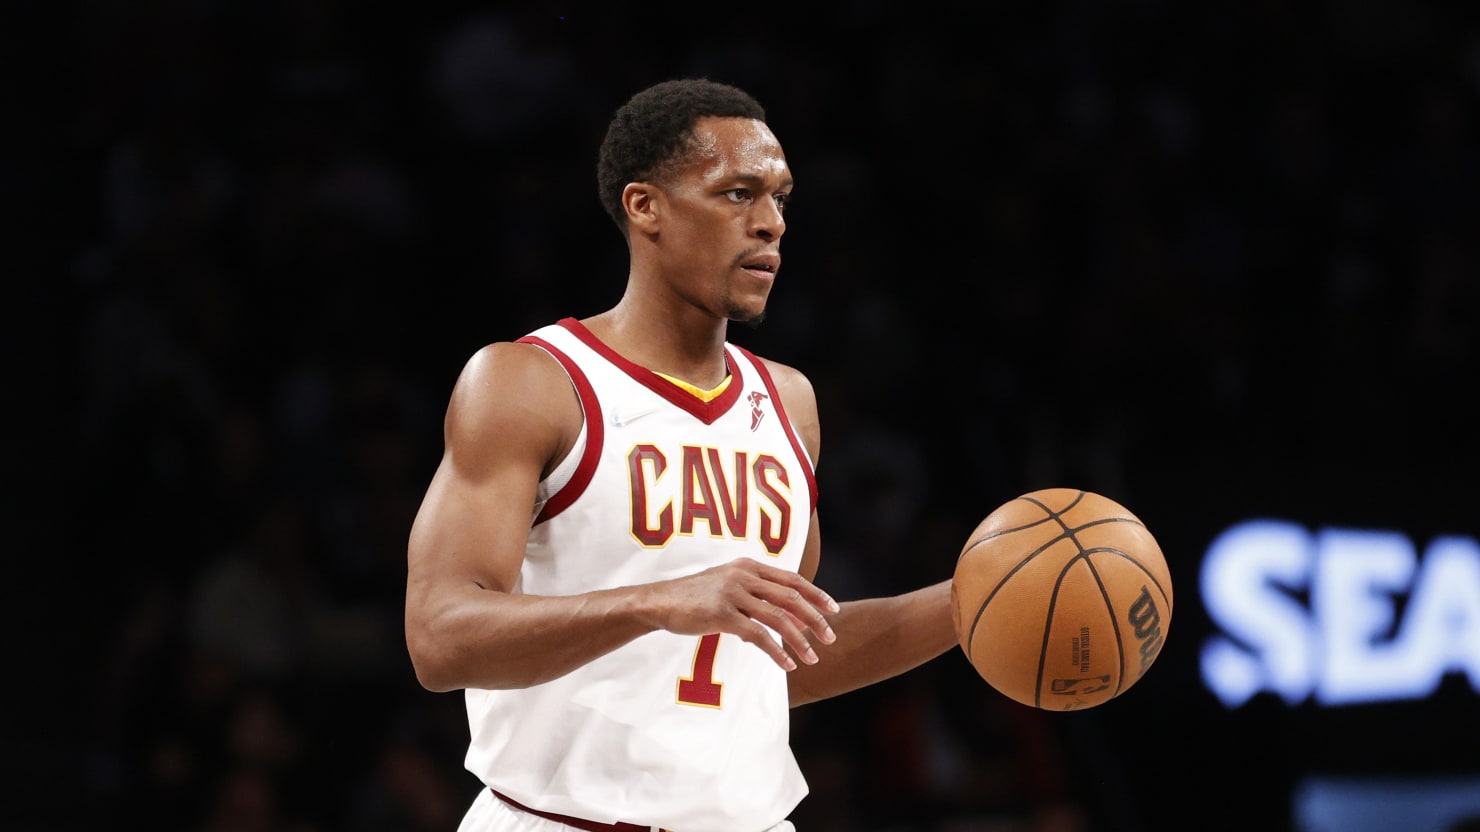 Rajon Rondo's former partner alleges he pulled gun in front of their kids